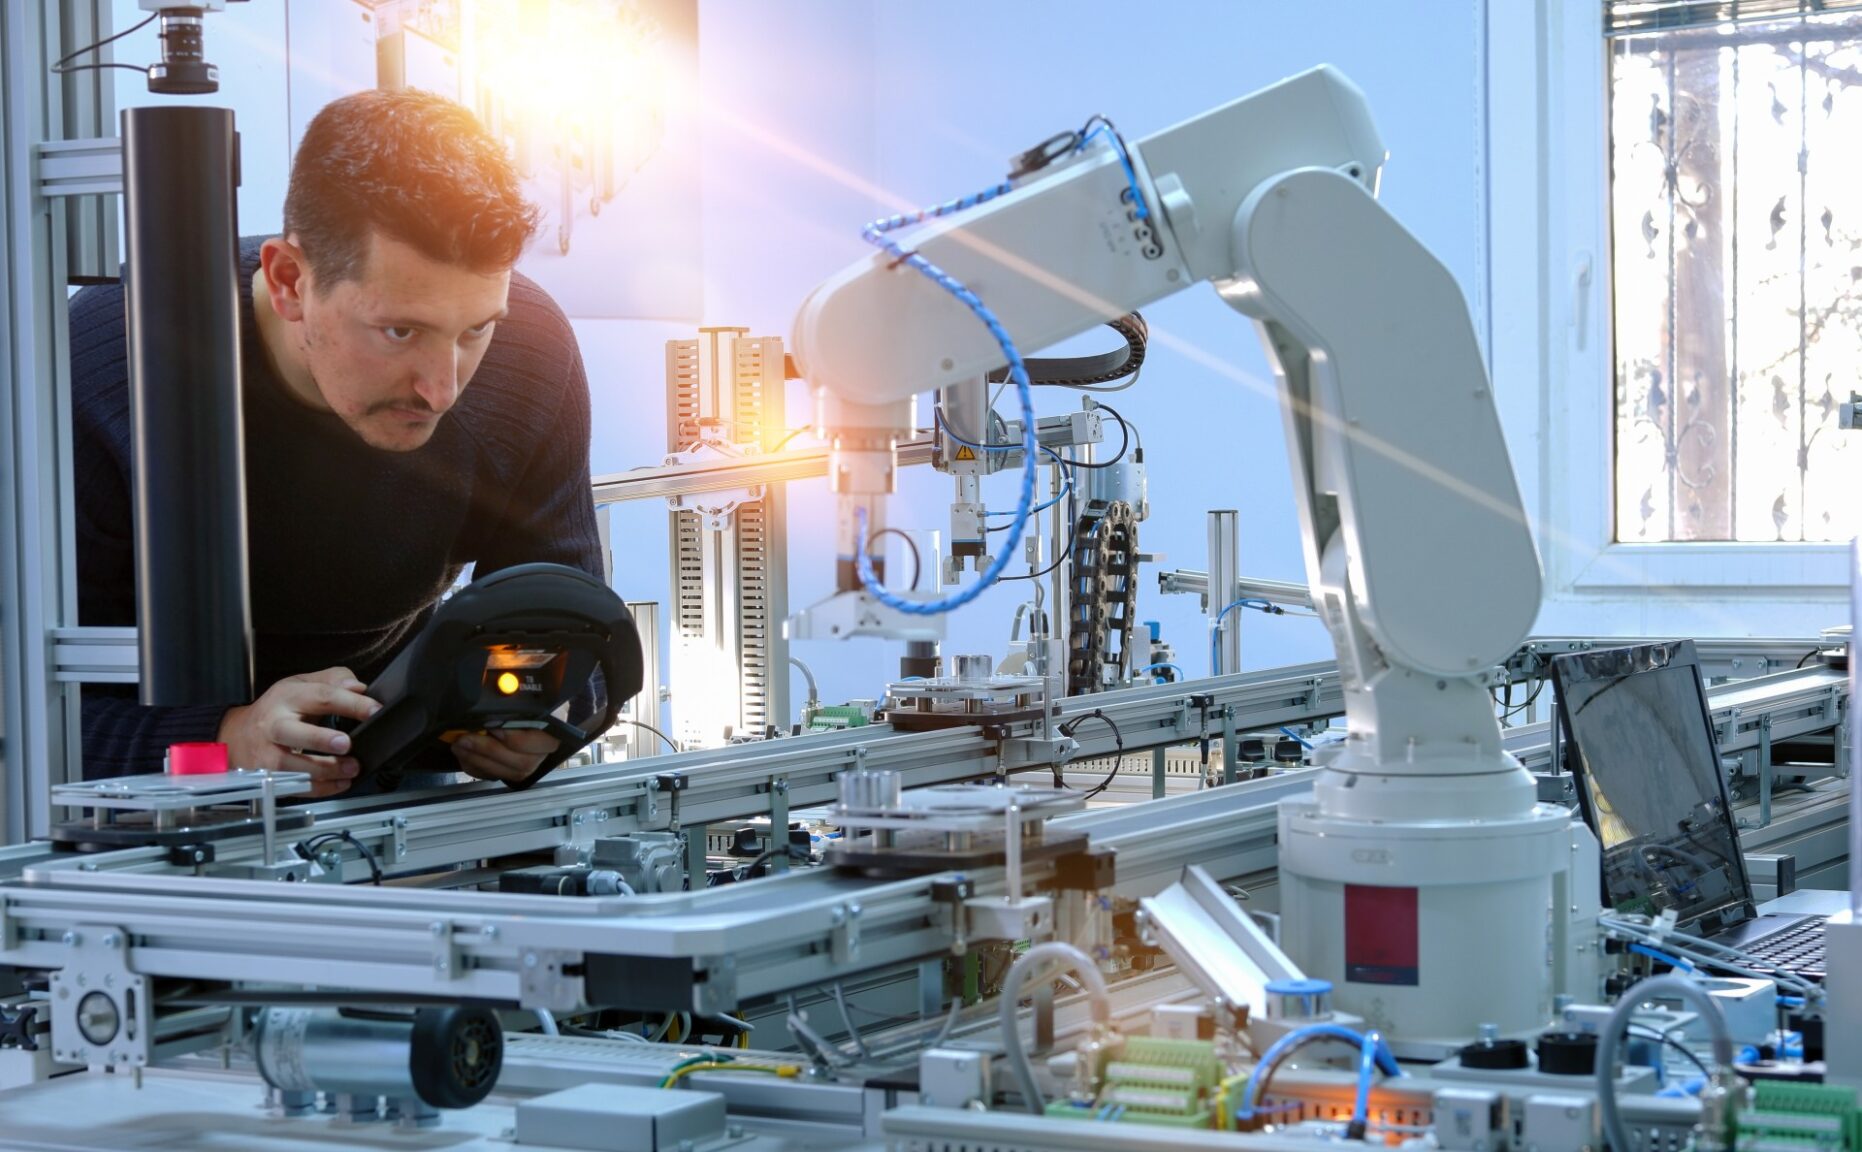 man programming a robotic arm to use in a smart factory for industry 4.0 or 5.0 use